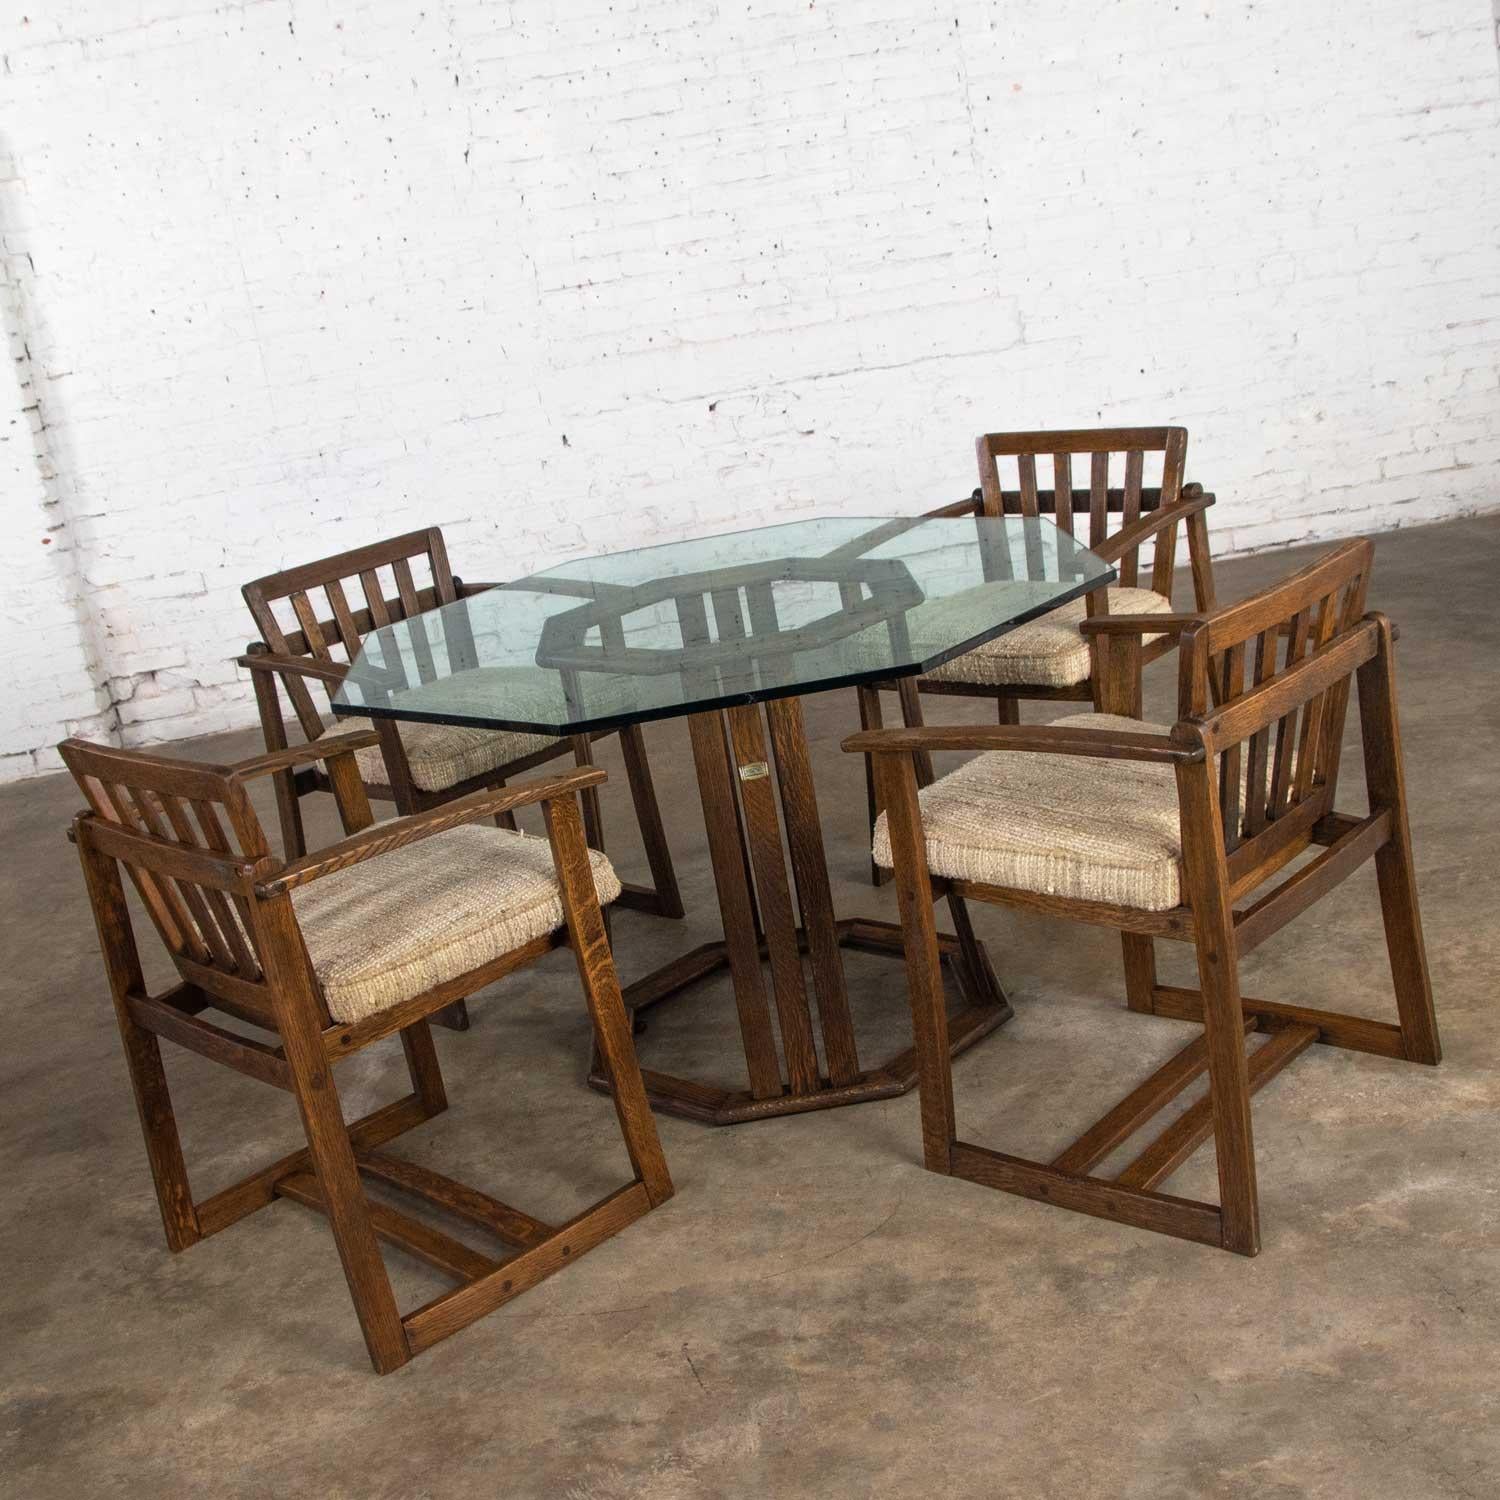 Handsome original StavOak dining table or game table and glass top with four (4) chairs designed by Jobie G. Redmond and made from Jack Daniels’ barrel staves. This set is in wonderful condition. The wood has been completely restored by our